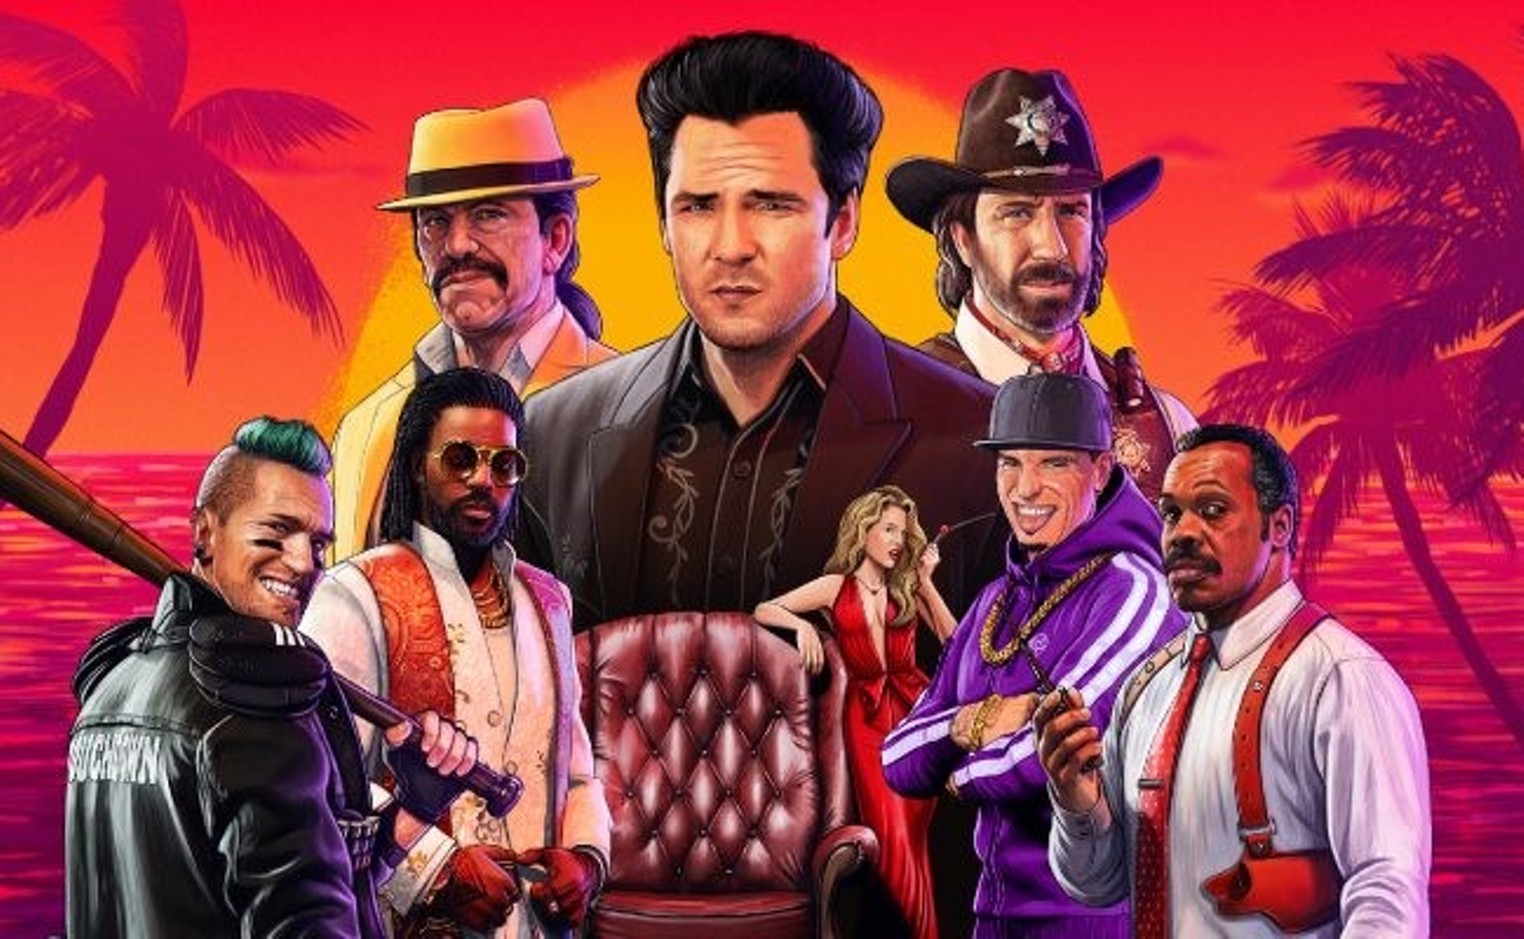 Vanilla Ice Is Part of the Impressive Cast in Video Game Crime Boss: Rockay City